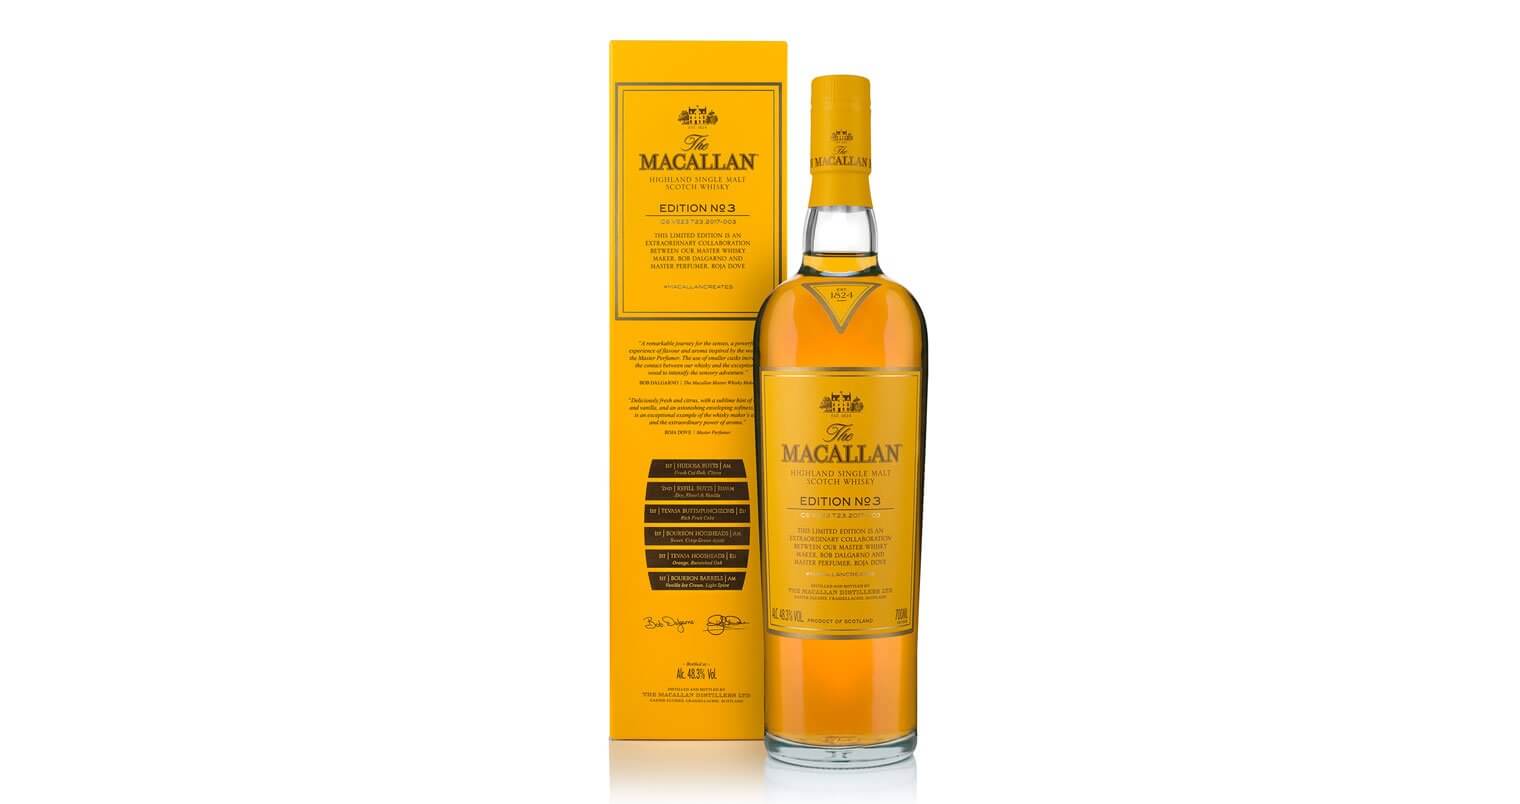 The Macallan Debuts Edition No. 3, featured image